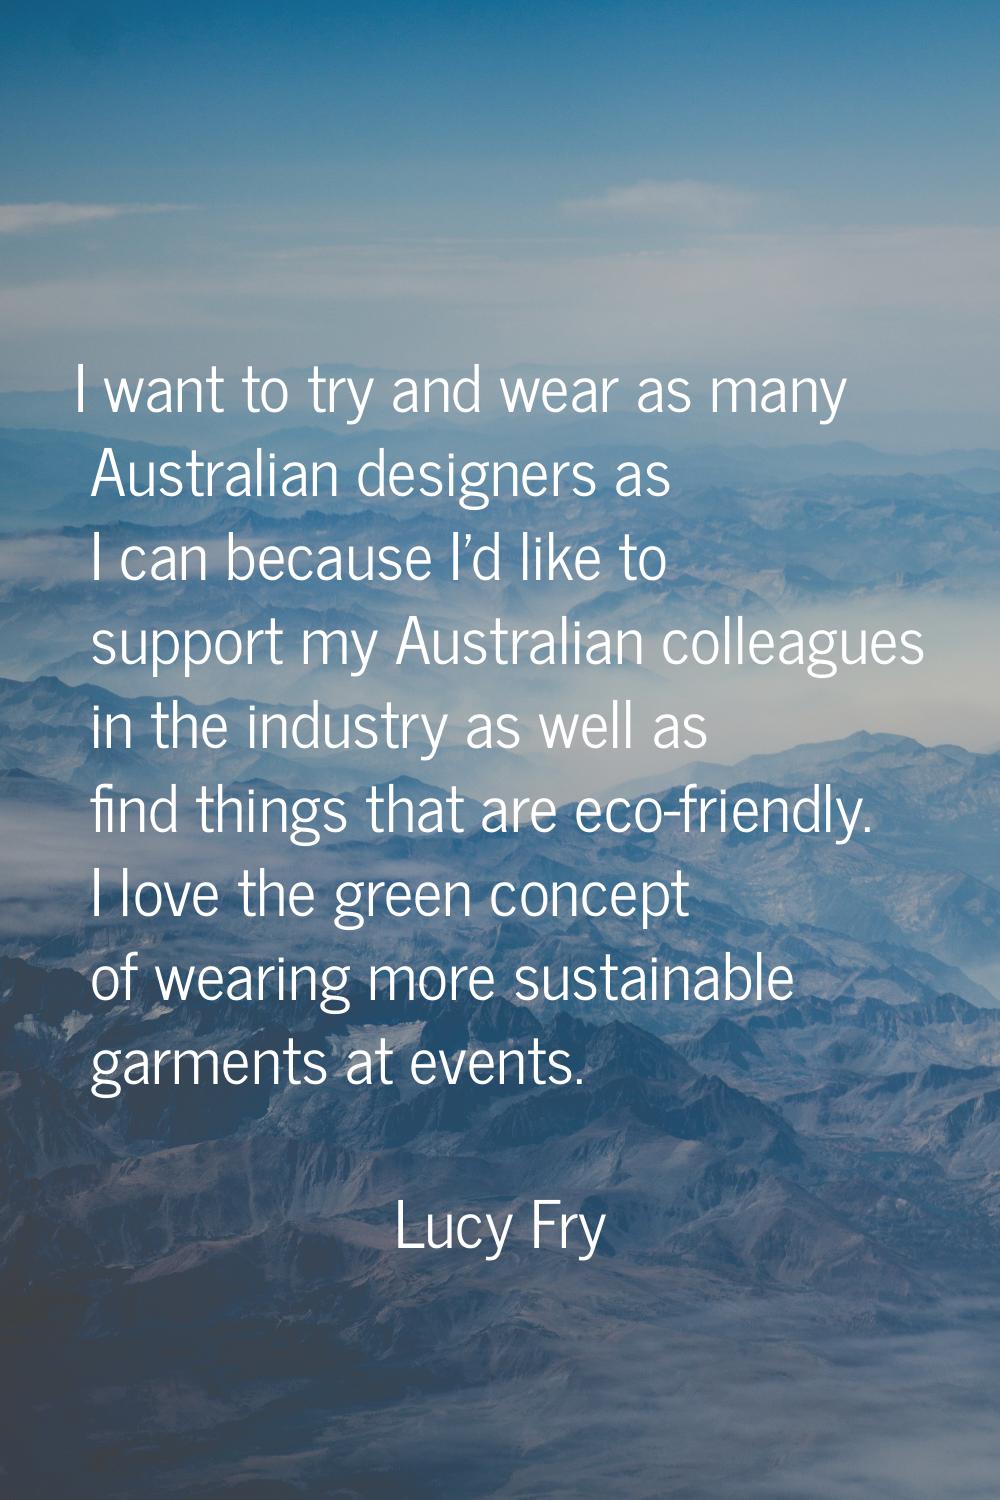 I want to try and wear as many Australian designers as I can because I'd like to support my Austral